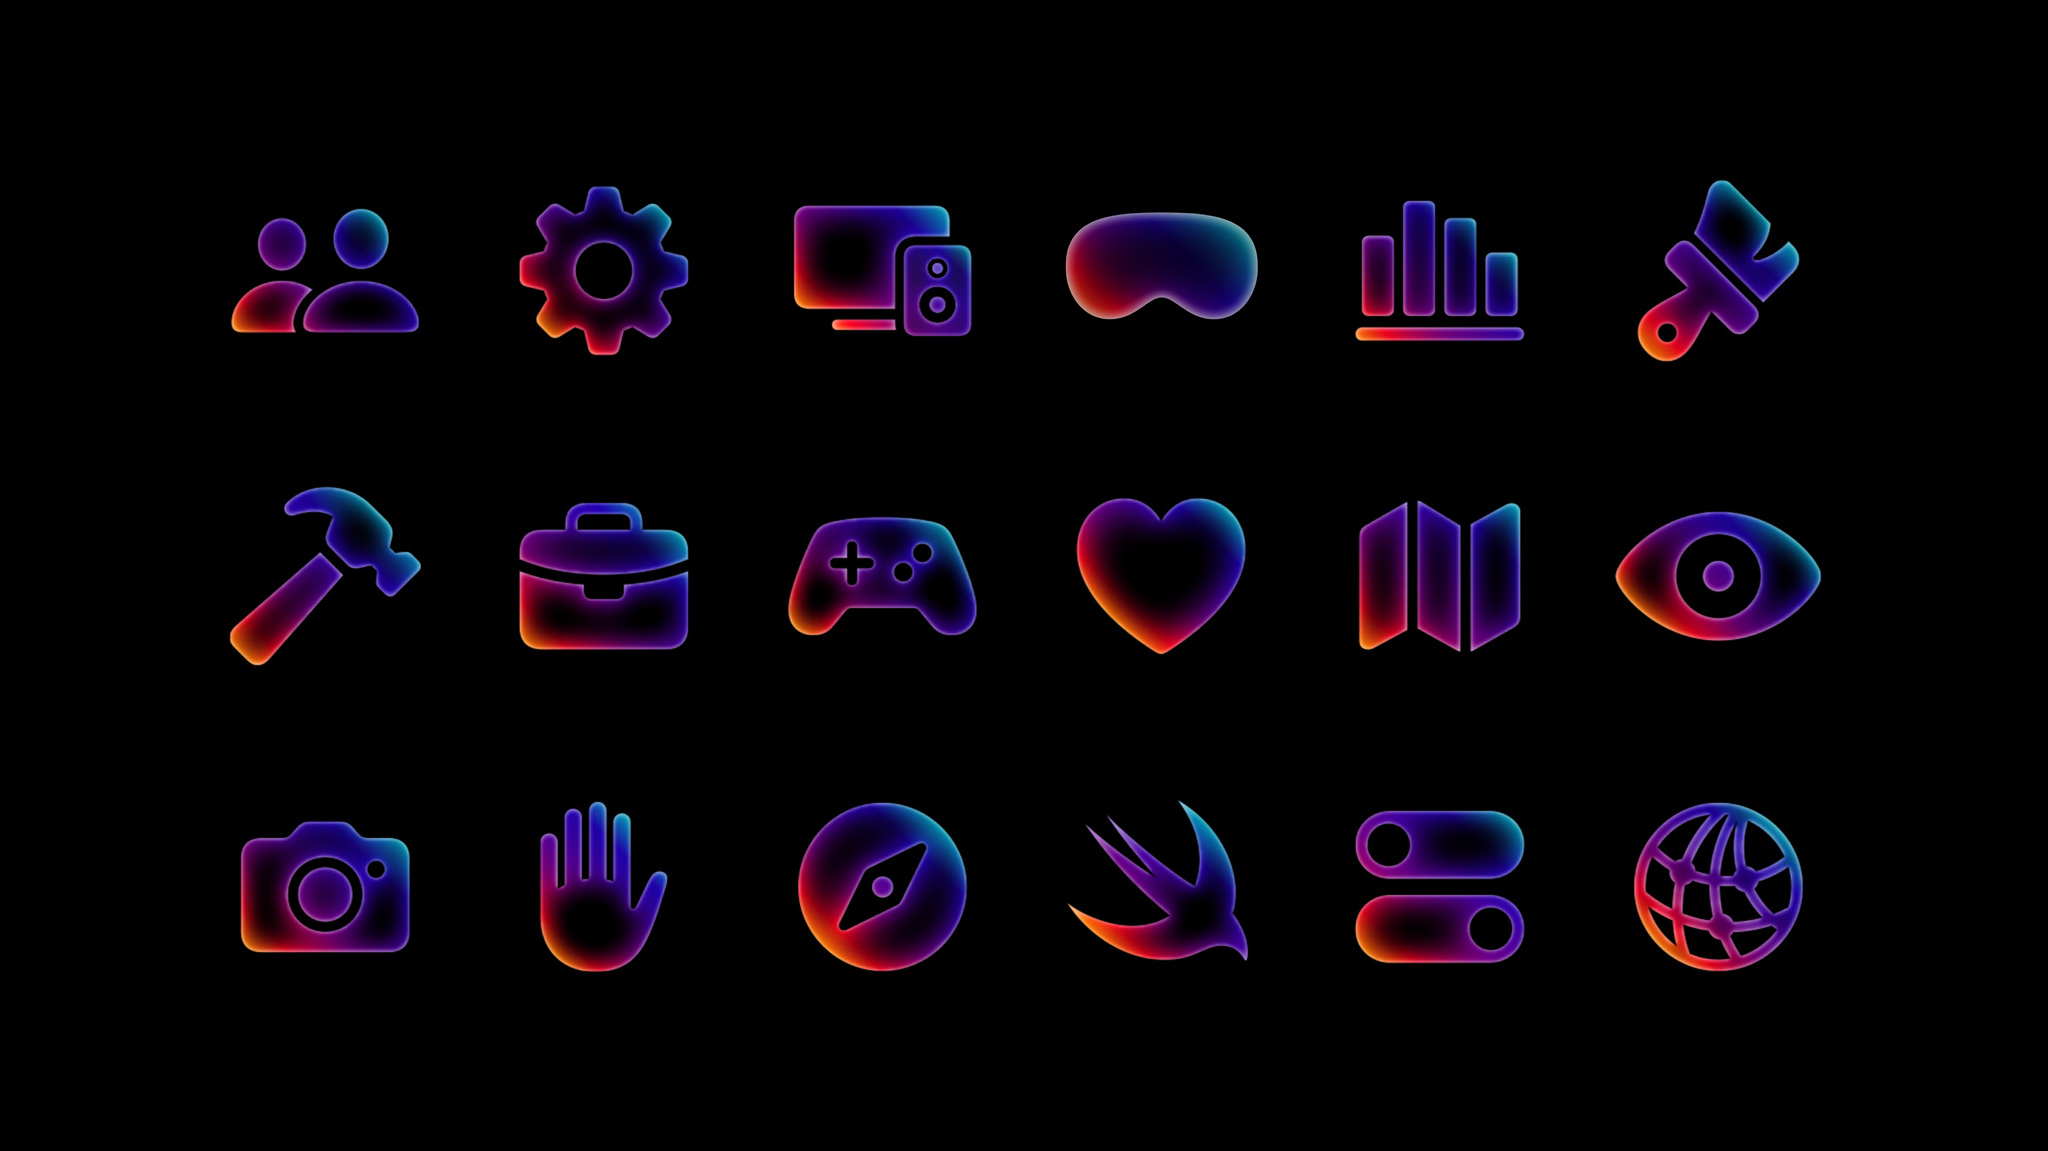 Rainbow colored icons representing development topics are arranged in three rows on a black background